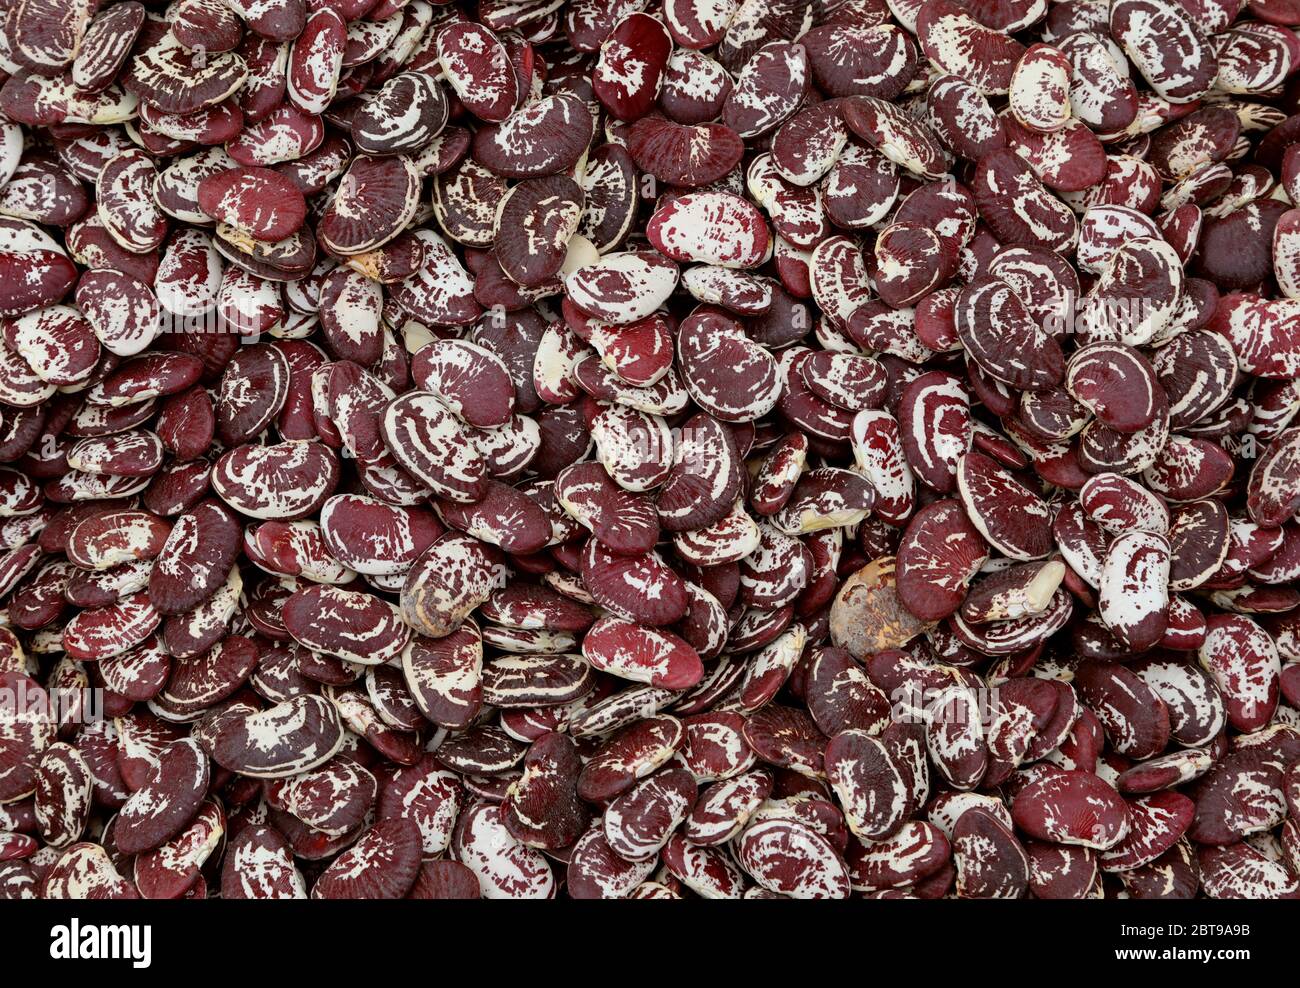 background of dark dried beans of a rare species called in Italy Pope beans or Fagioli del Papa in Italian language Stock Photo